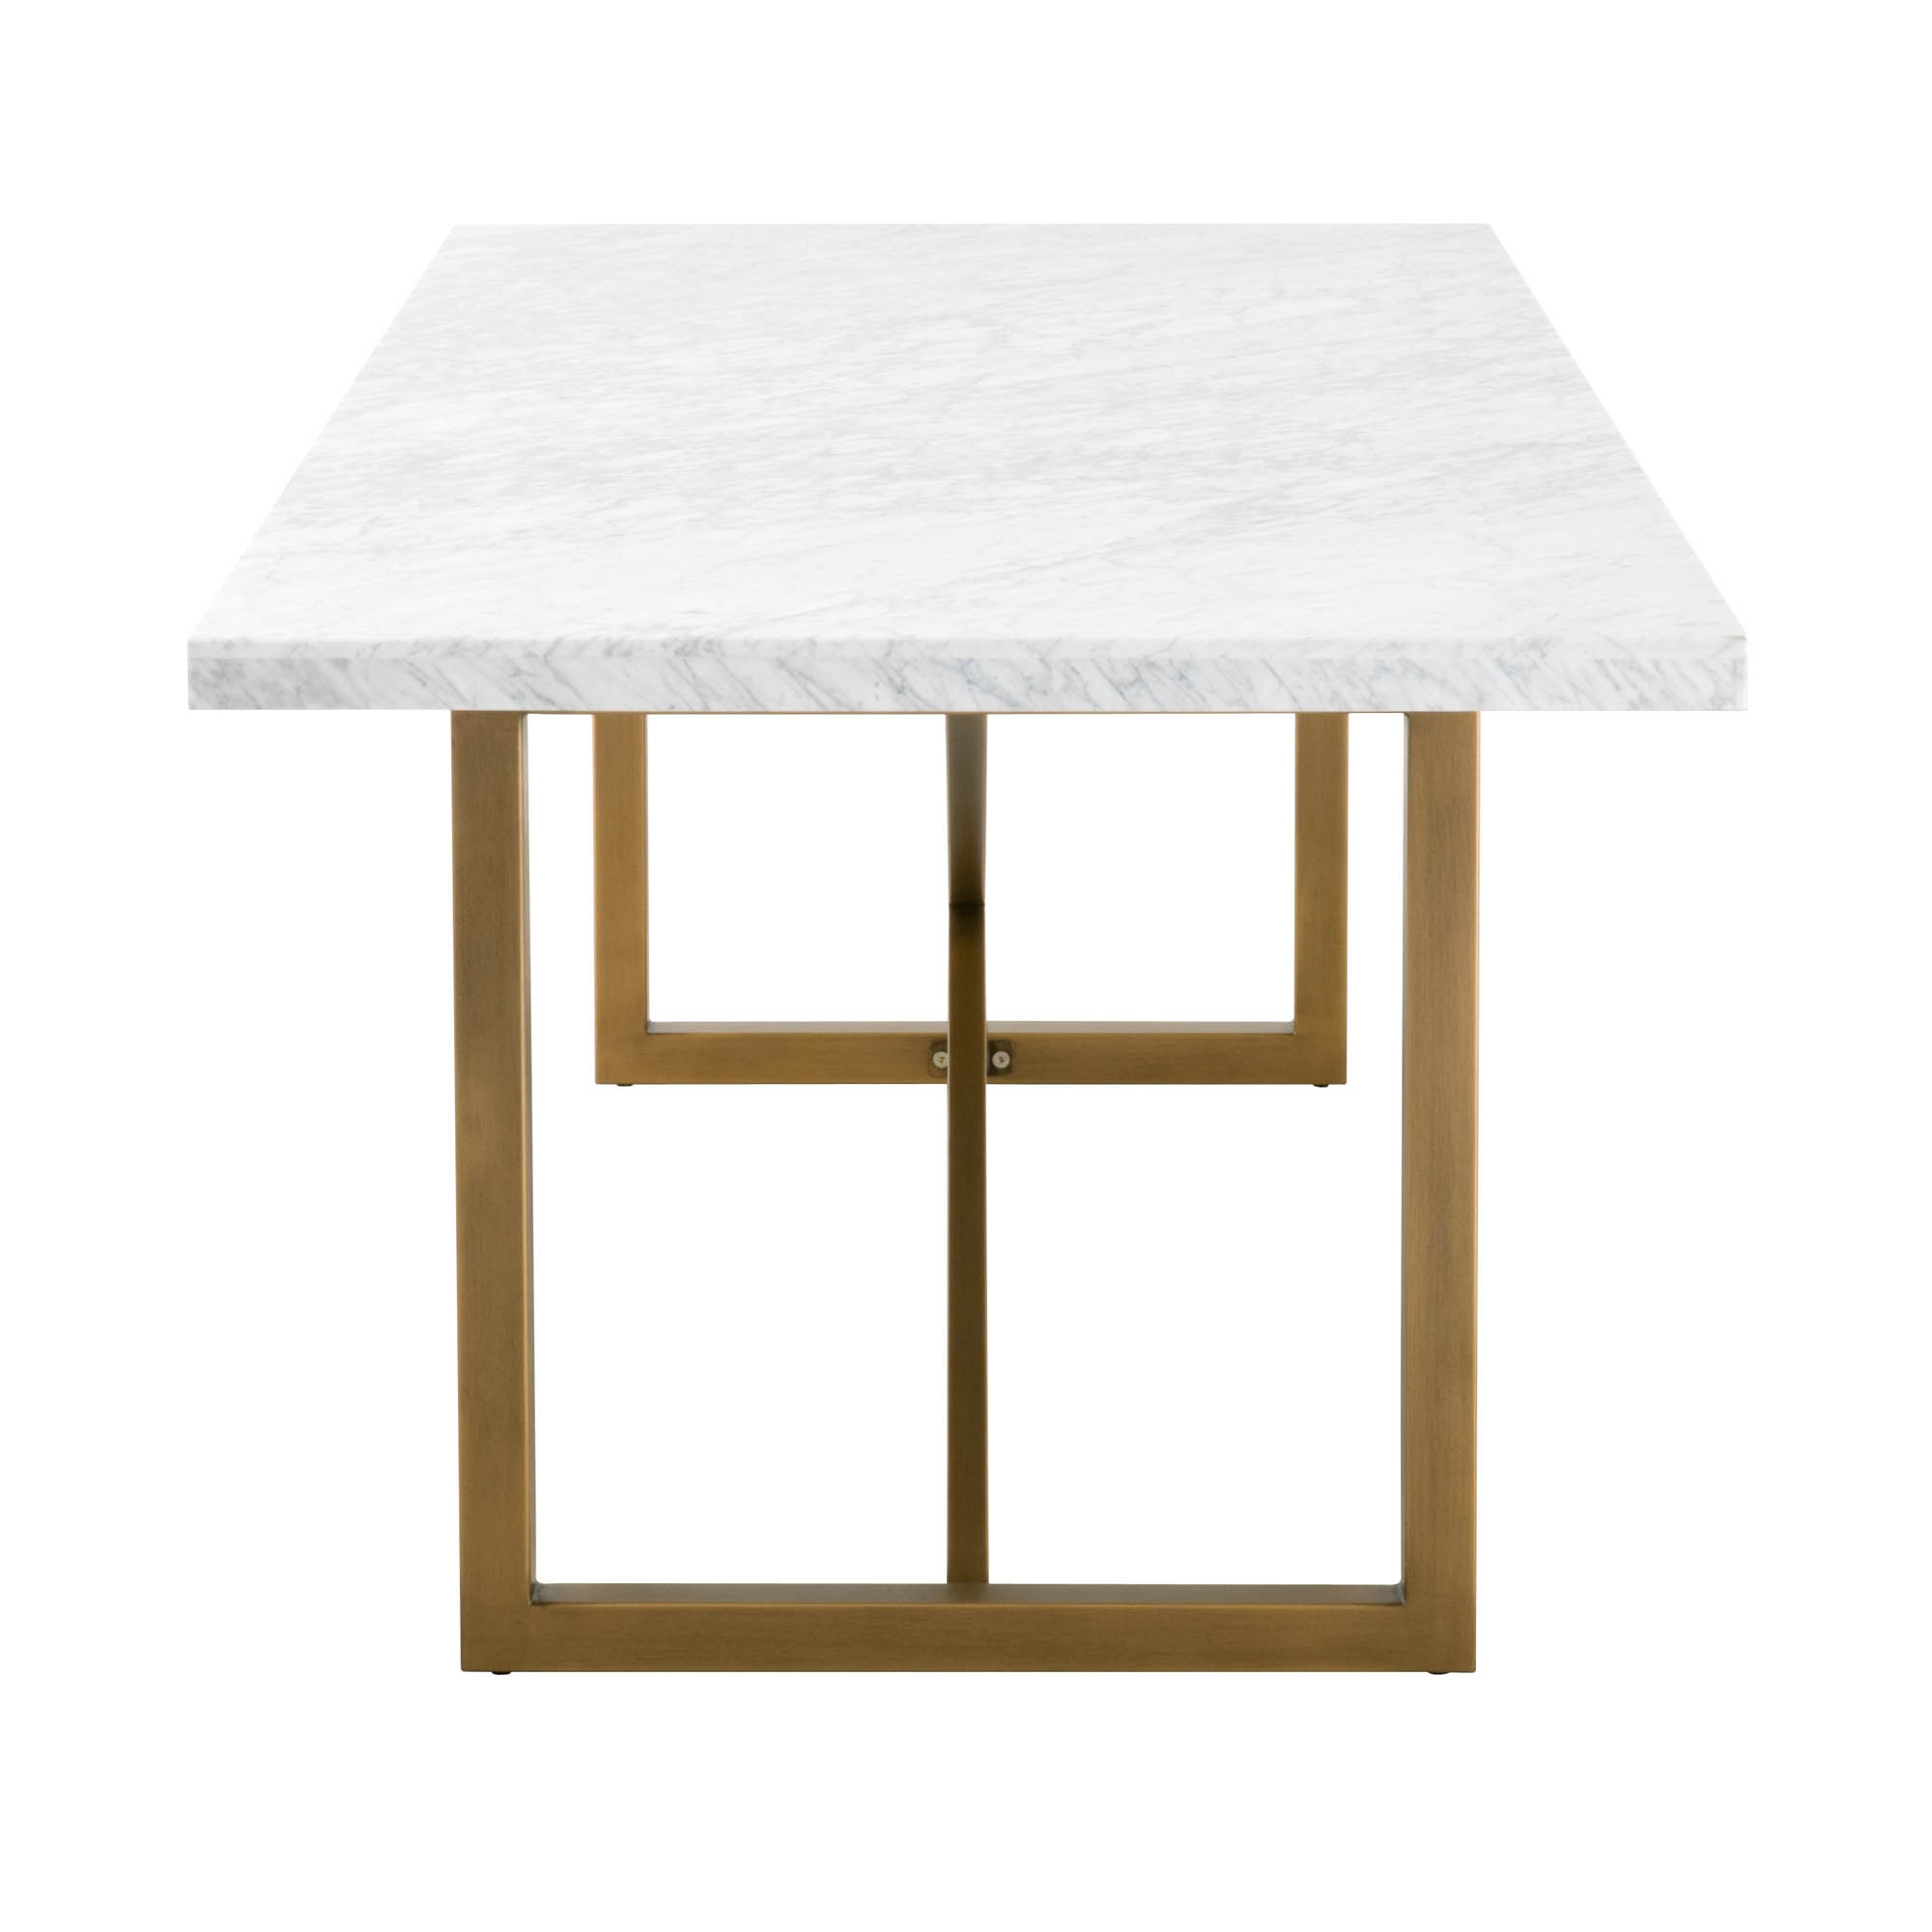 Carrera Dining Table, White & Gold - Image 2